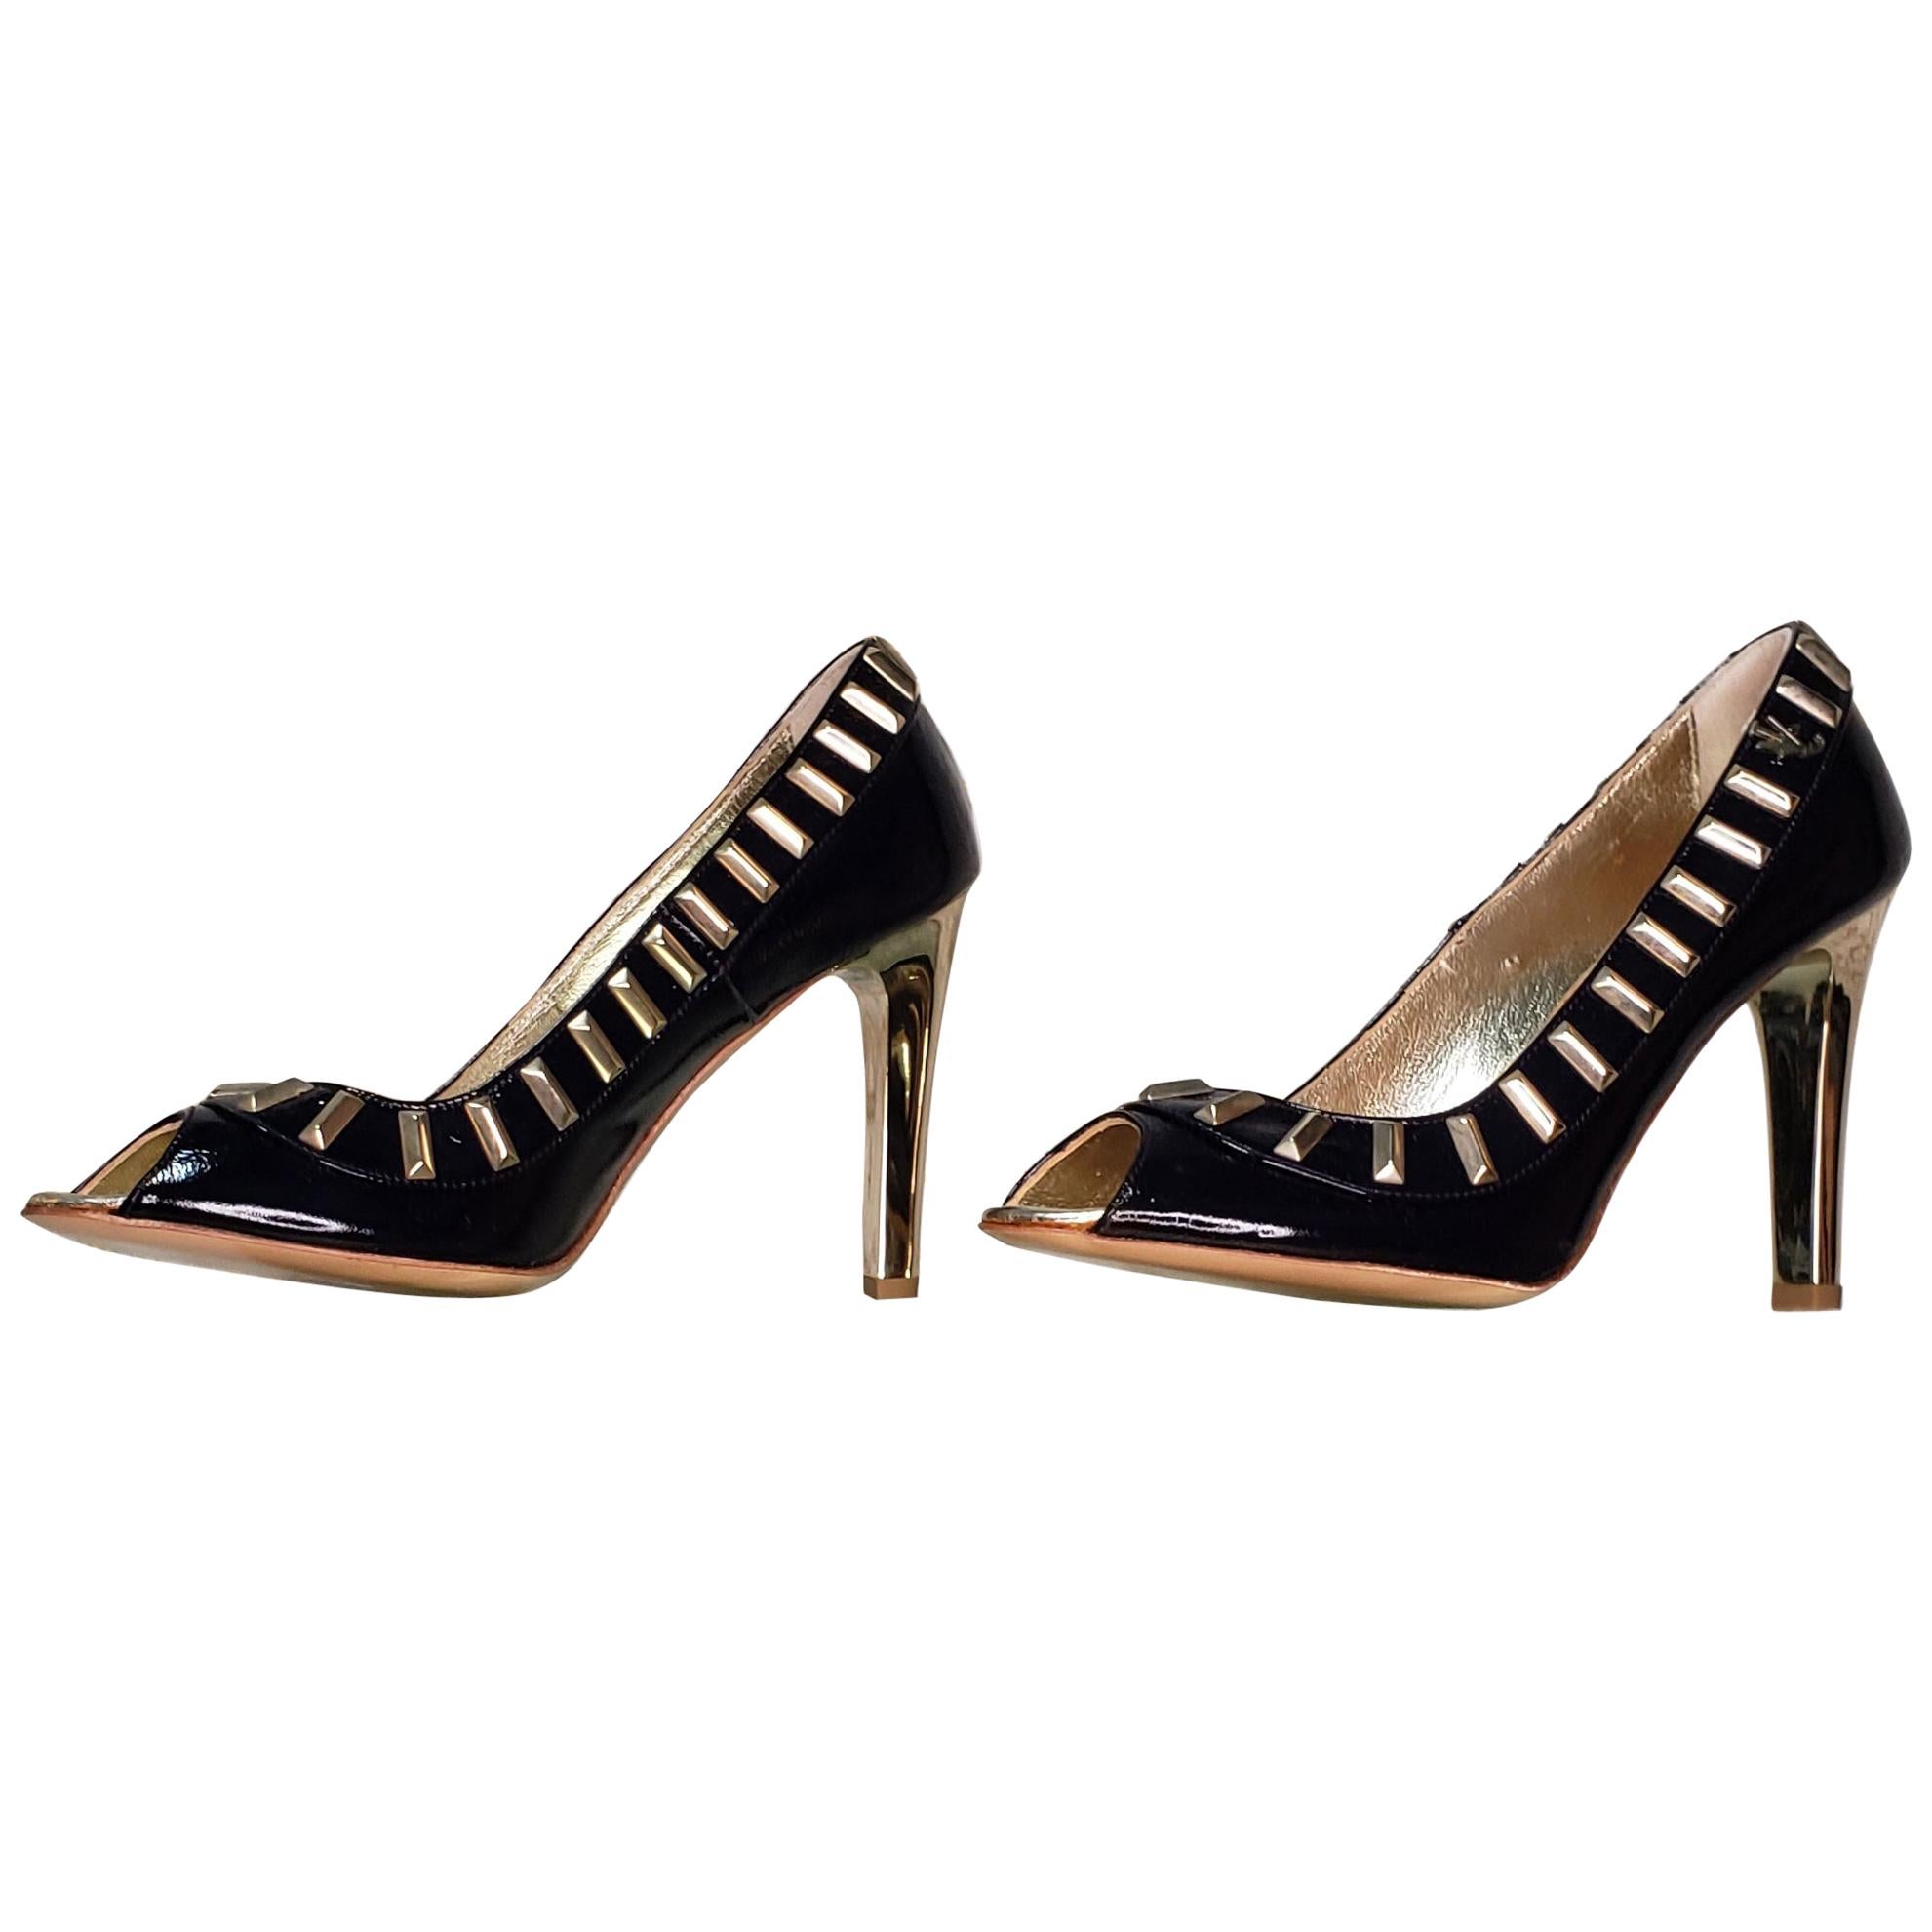 VERSACE JEANS COUTURE PUMPS In DARK NAVY BLUE with GOLD HEELS 36.5 - 6.5, 39 -9